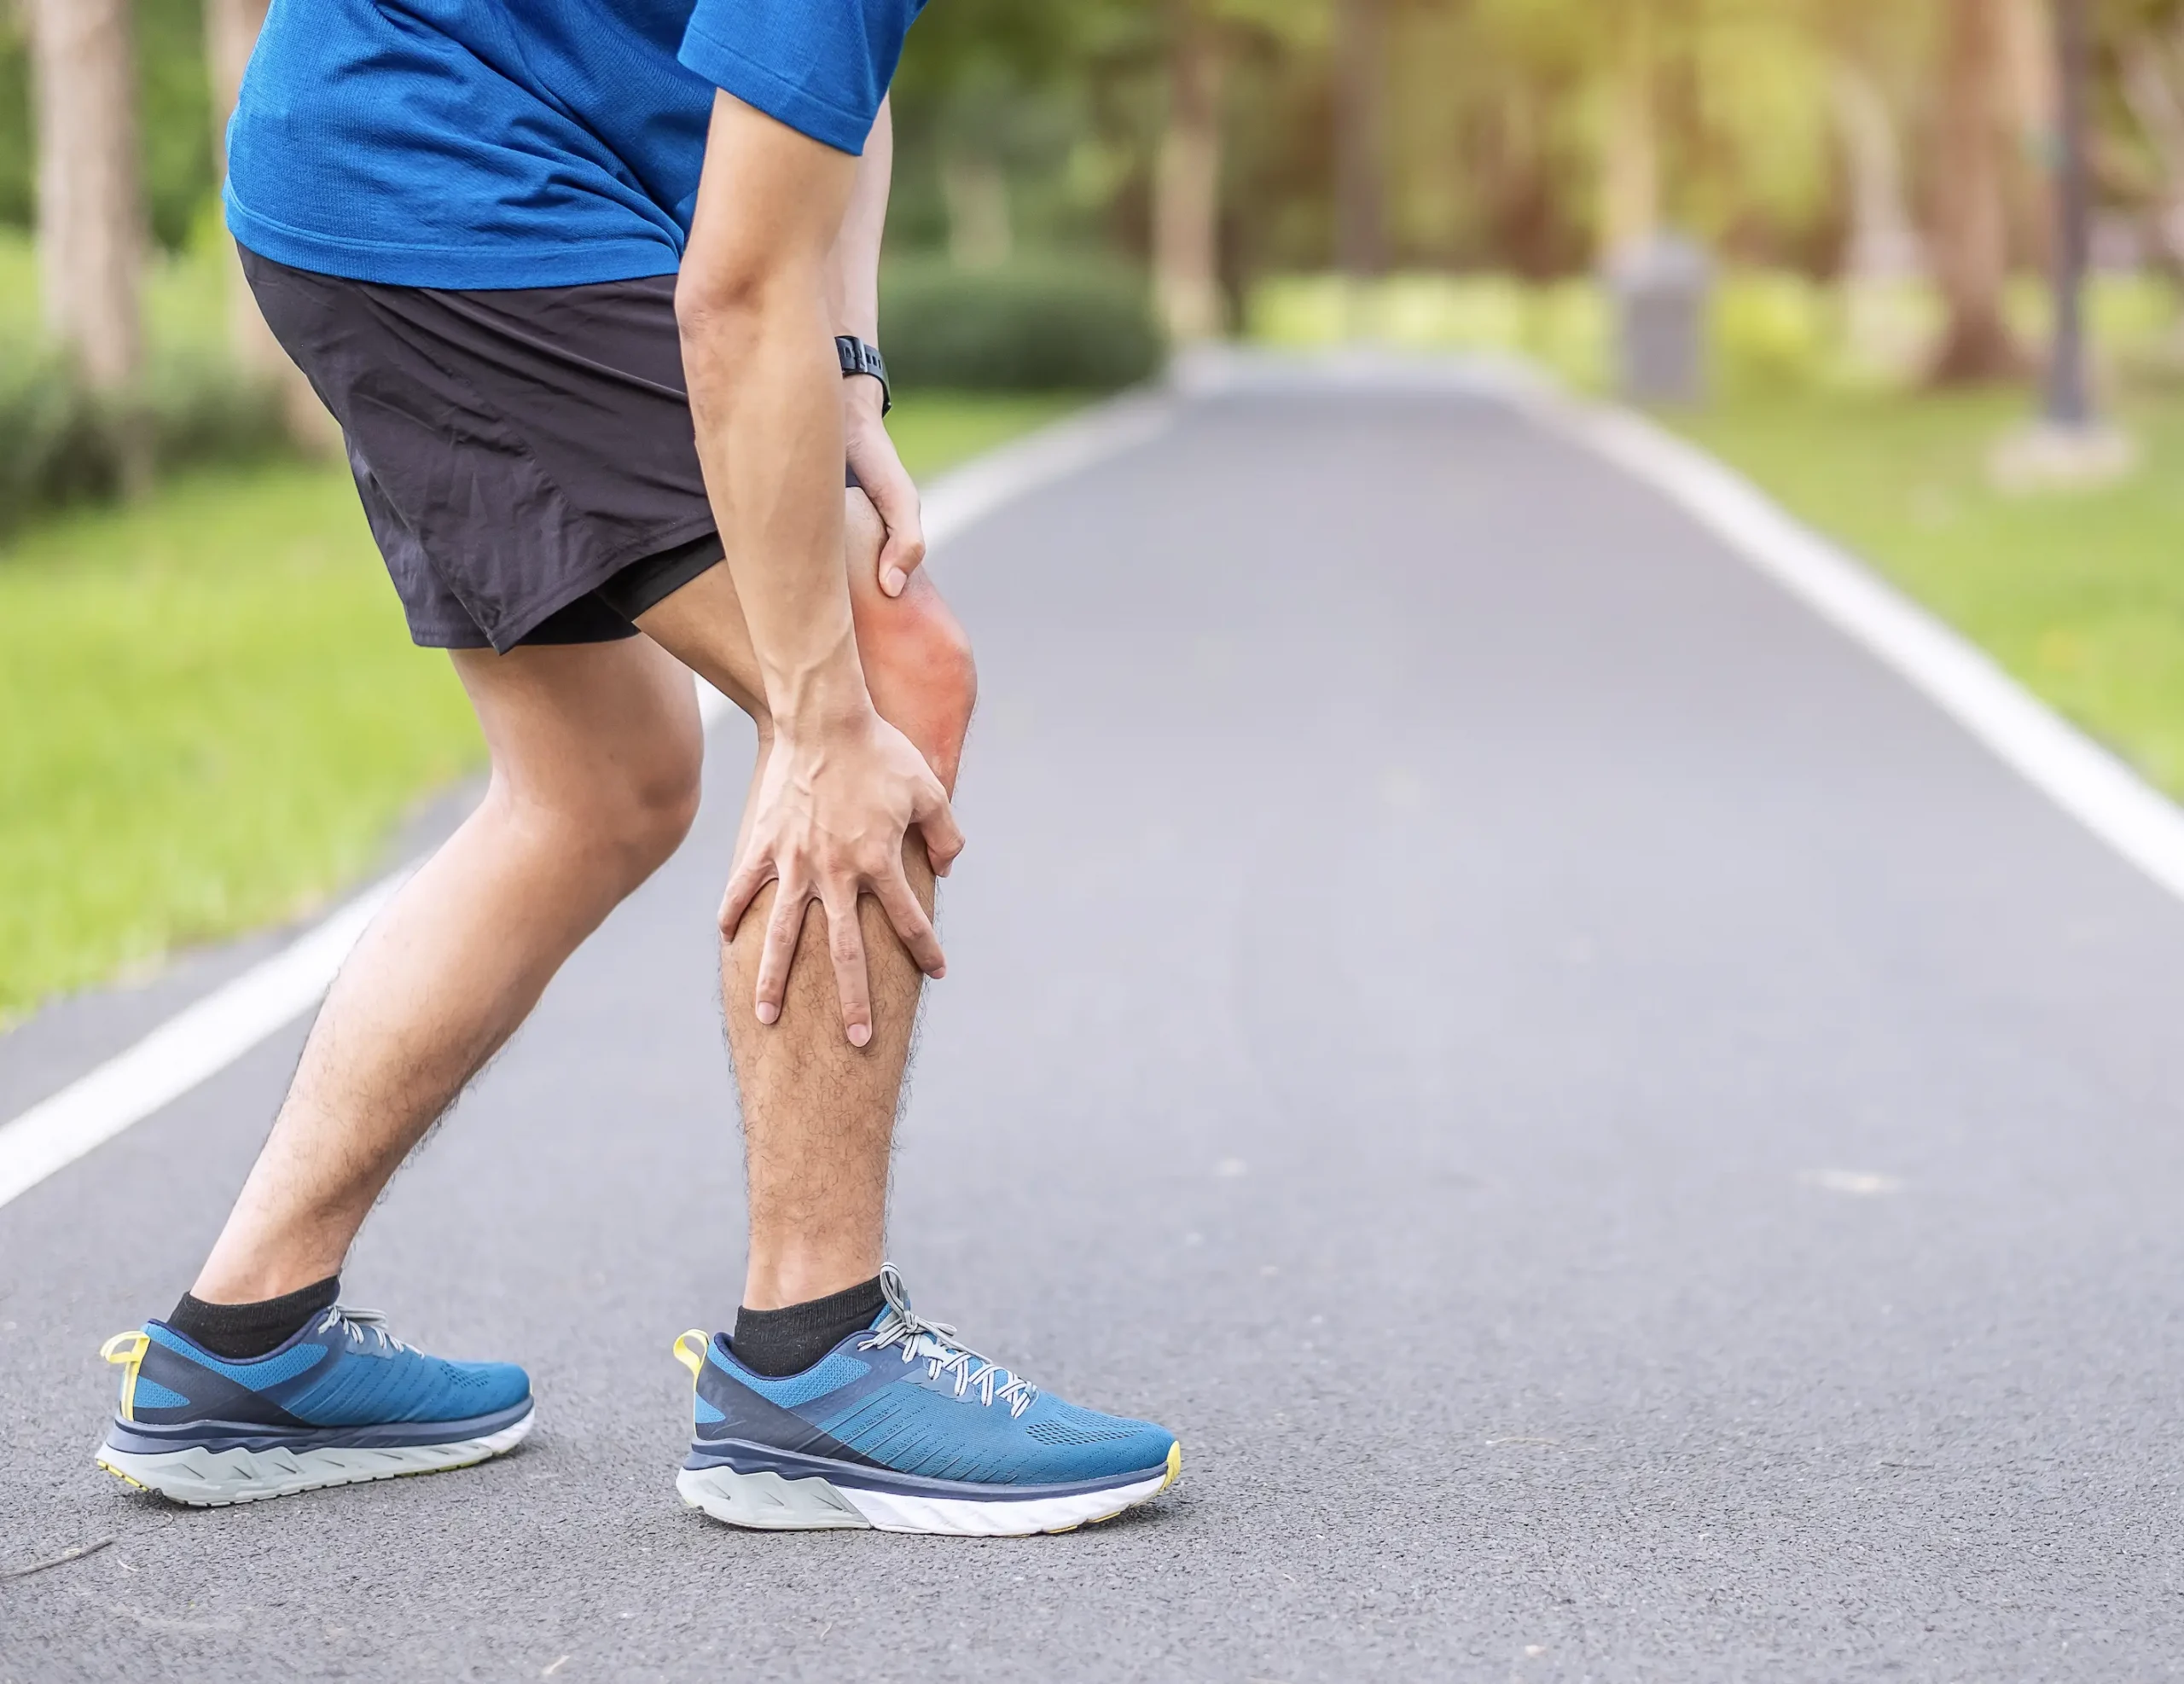 running with knee pain |feelgoodlife